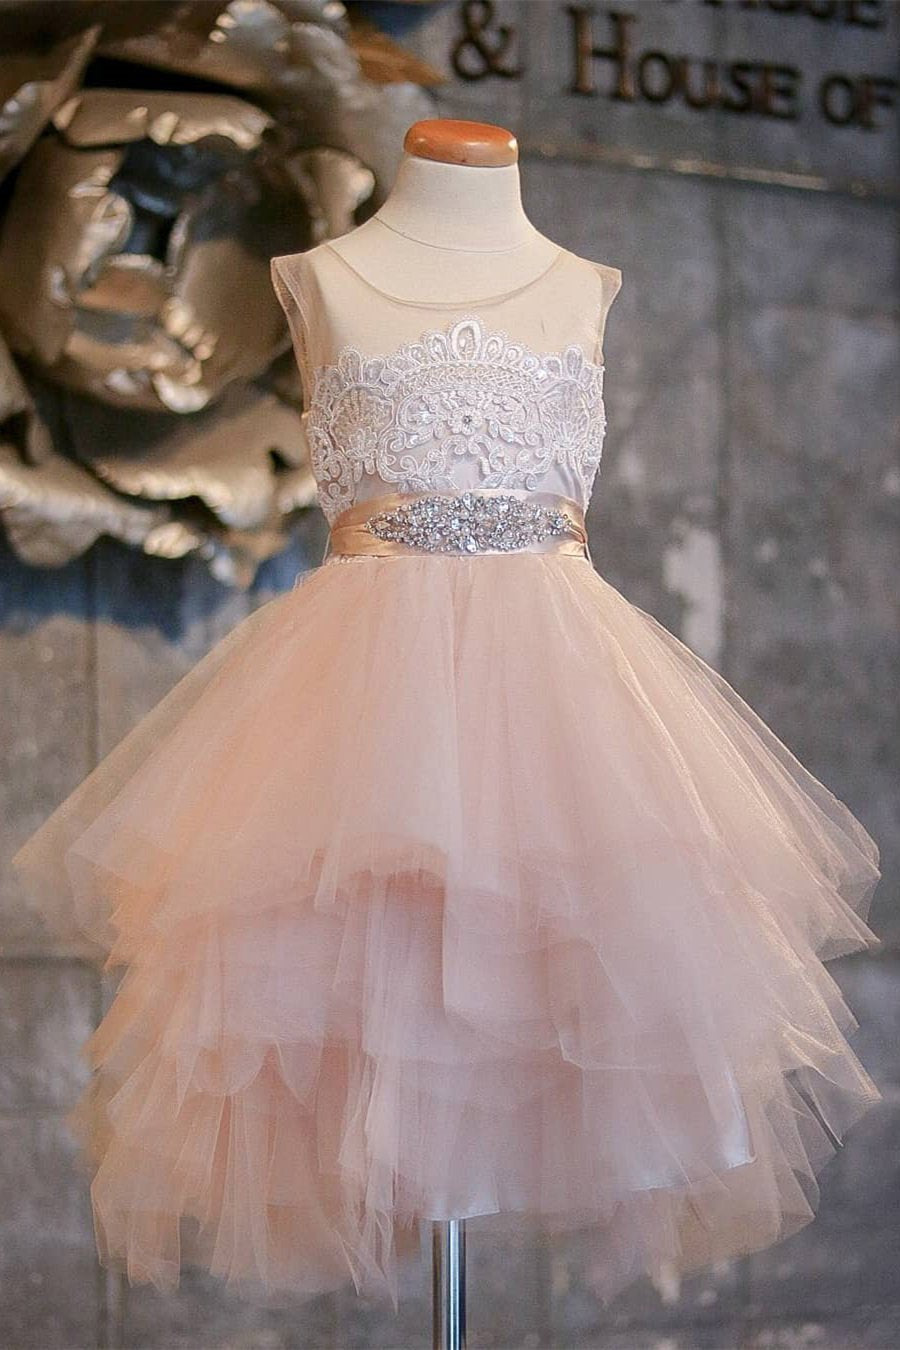 Blush Pink Flower Girl Dresses Cap Sleeve Asymmetric Tulle Lace Top Cute Dress for Kids WK99